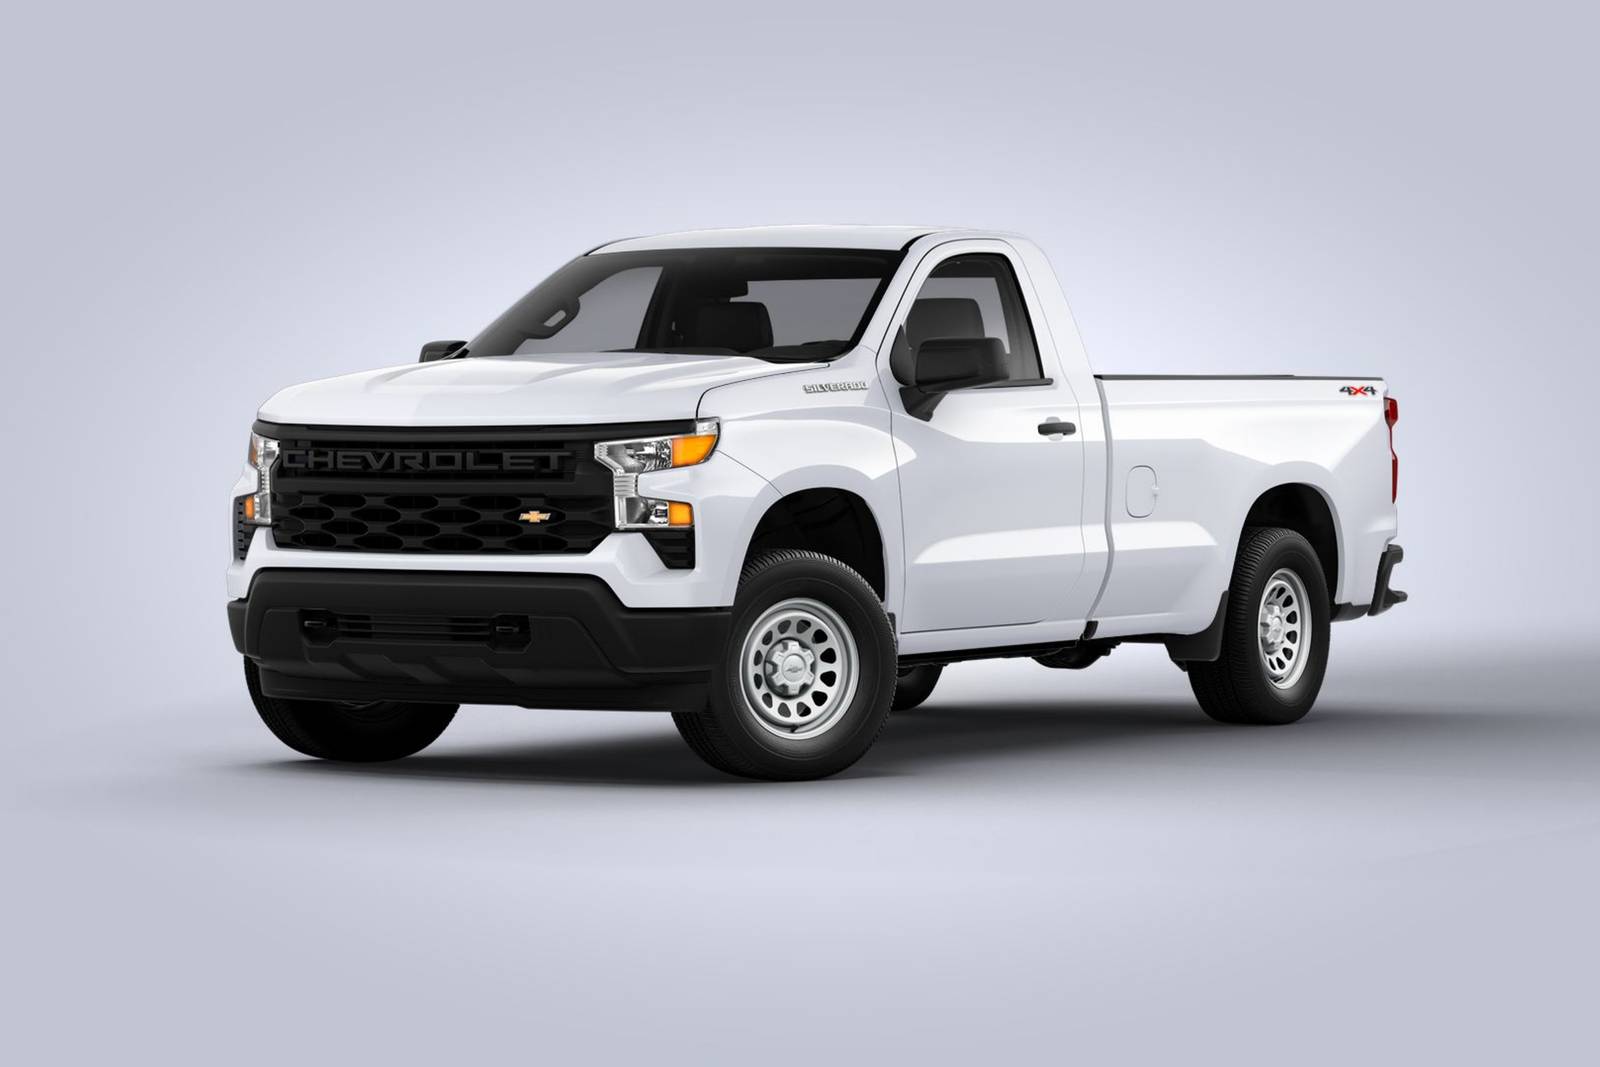 2023 Chevy Regular Cab Short Bed Price